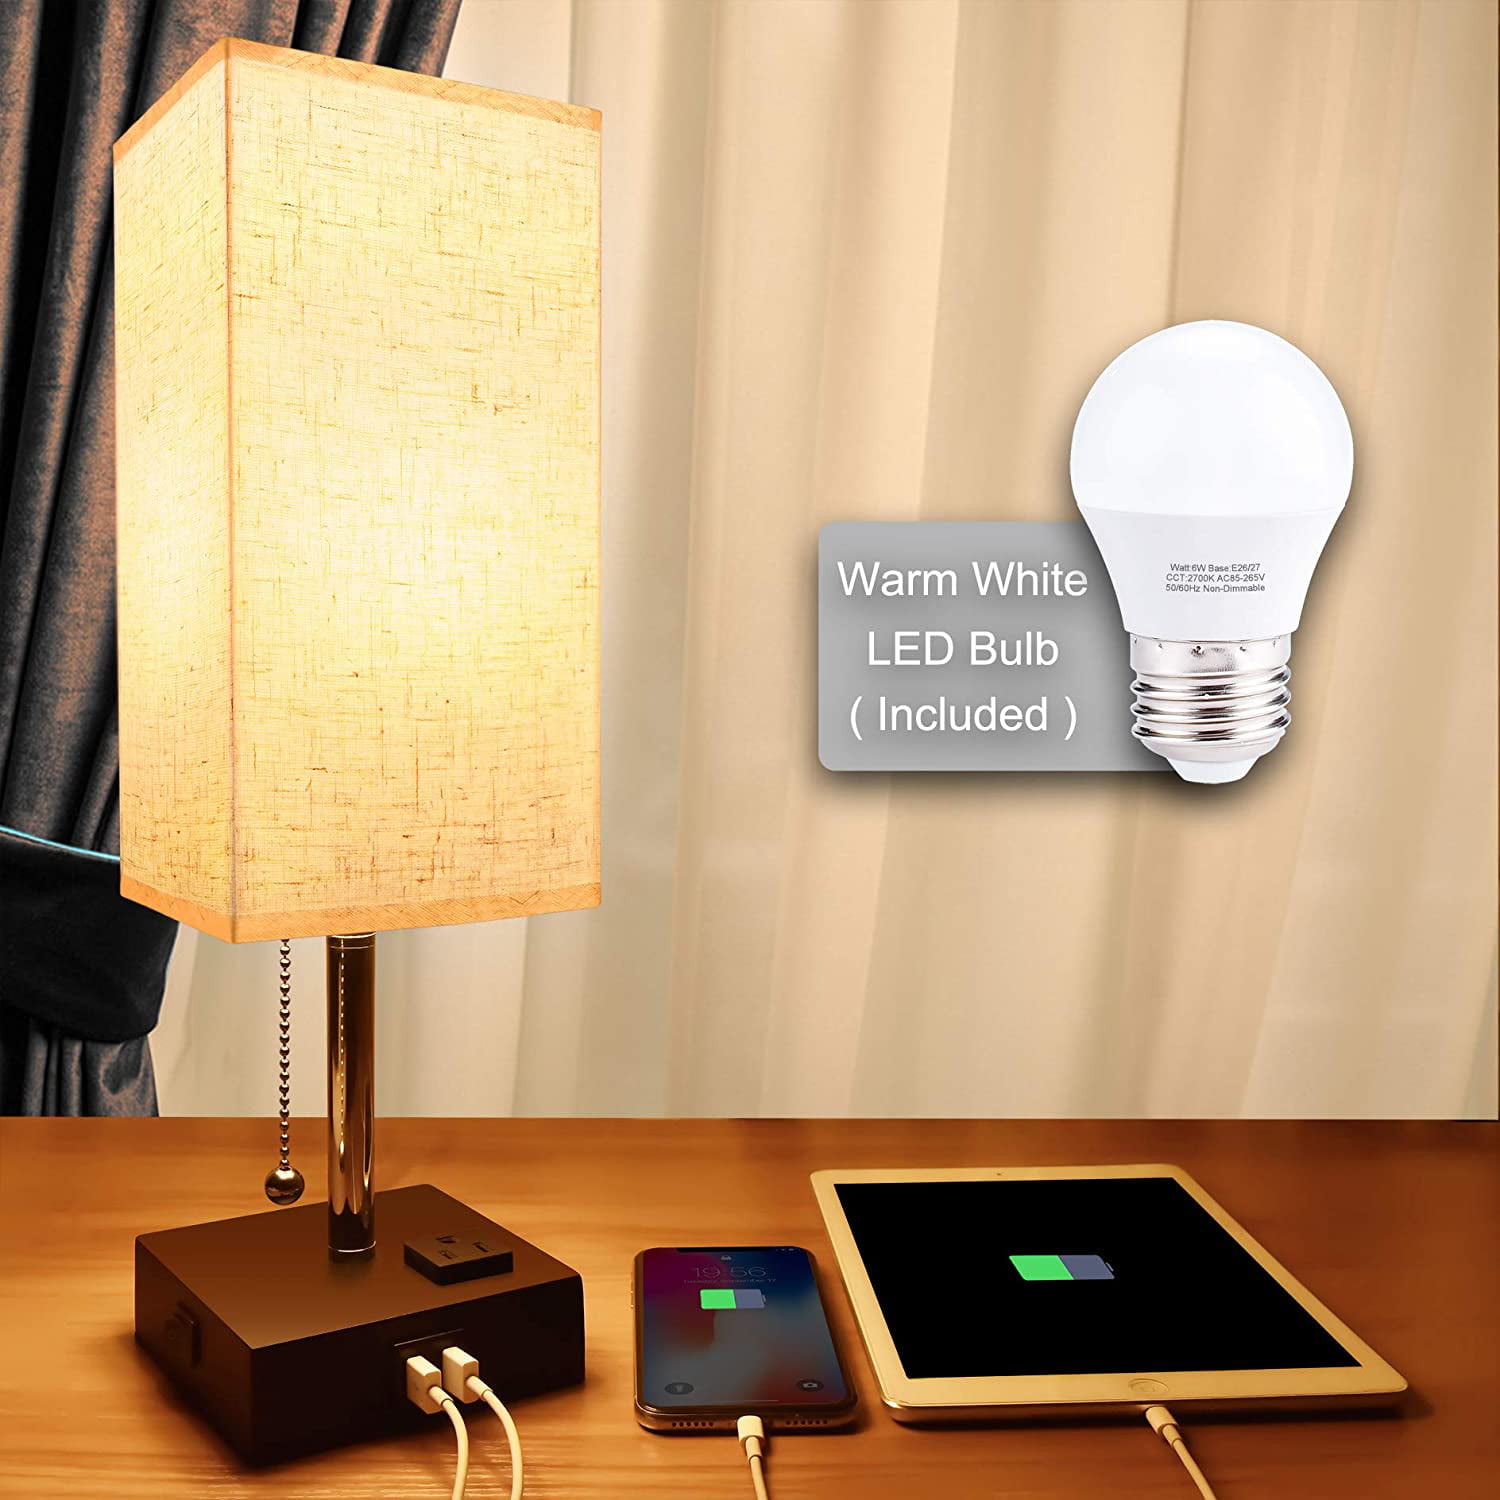 Solid Wood Charging Light Minimalist Fabric LED Desk Lamp Includes E27 LED Bulb Warm White for Home Dinning Living Room and More B4U Bedroom Bedside Table Lamp with USB Port 